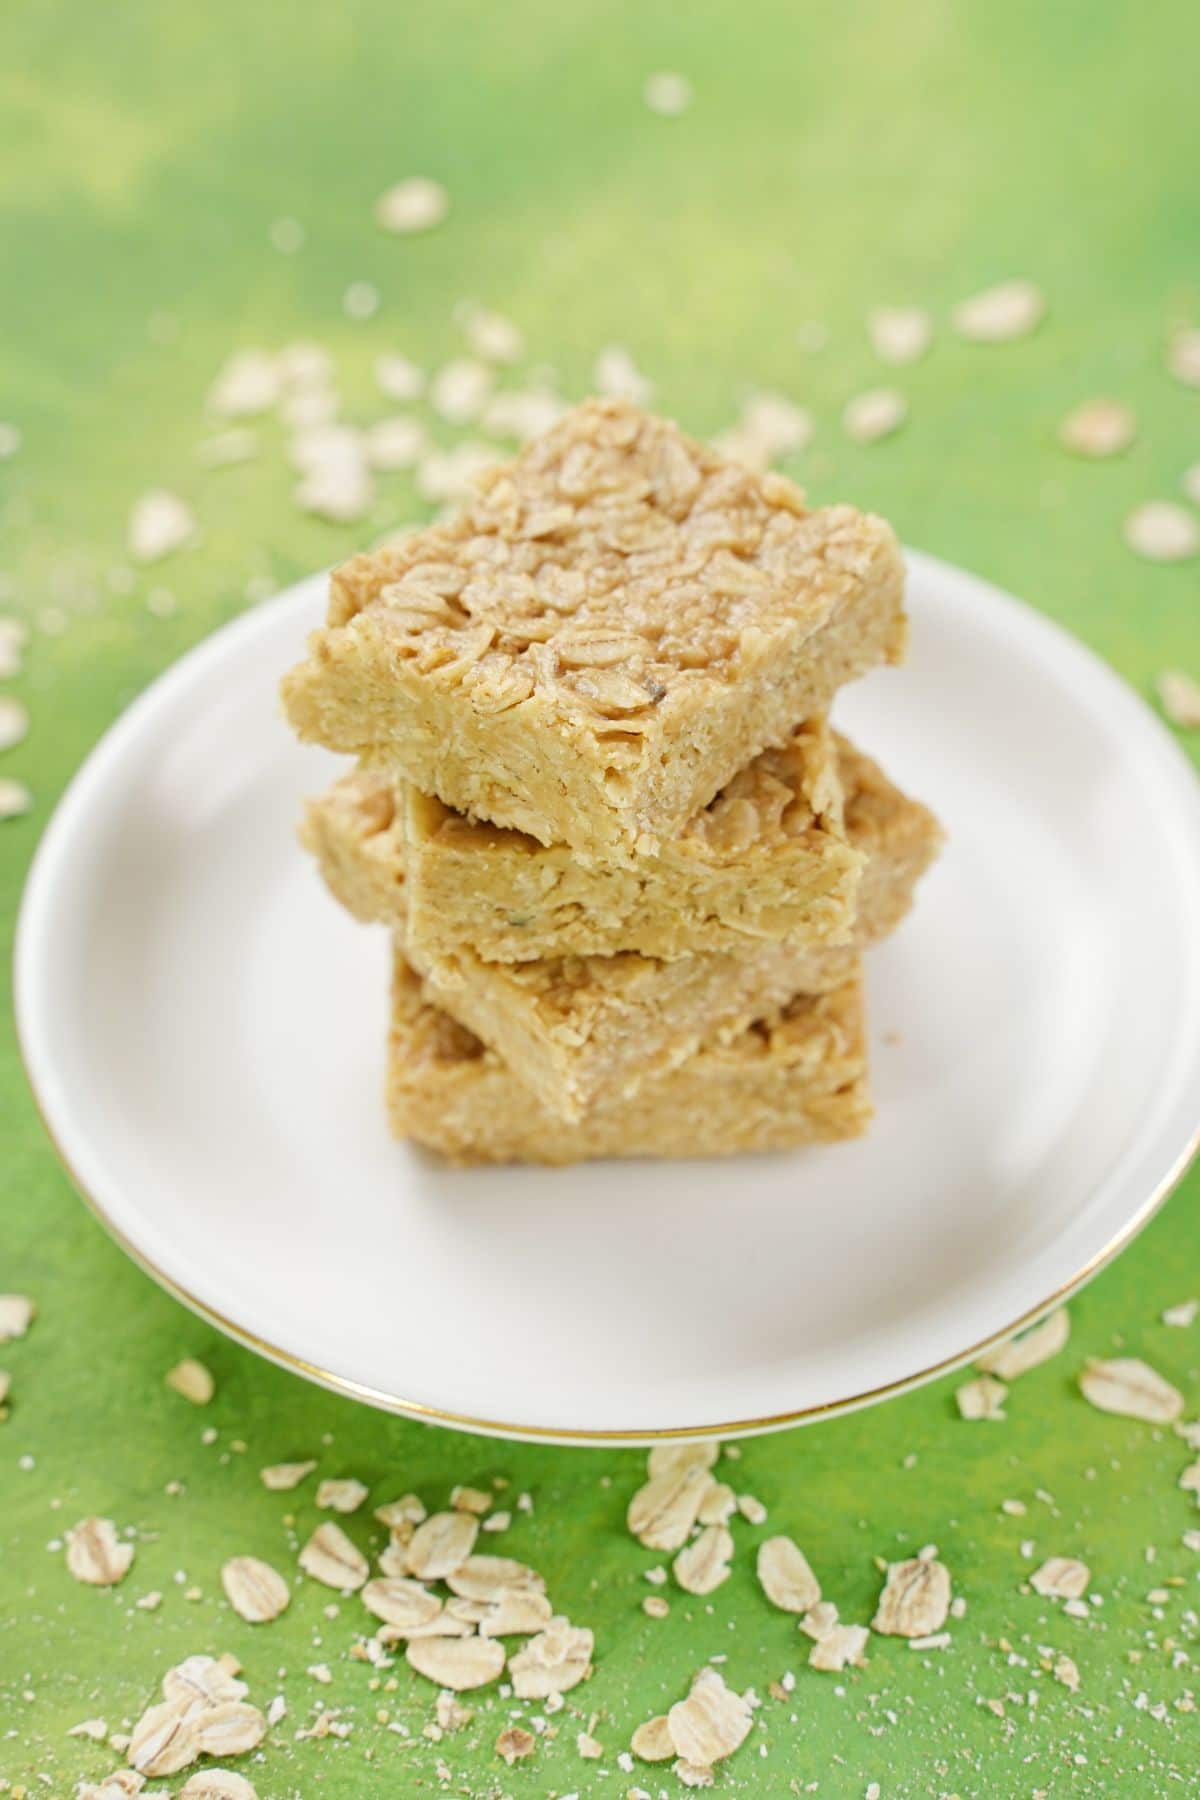 Zoom image of Peanut Butter Oat Bars on a plate